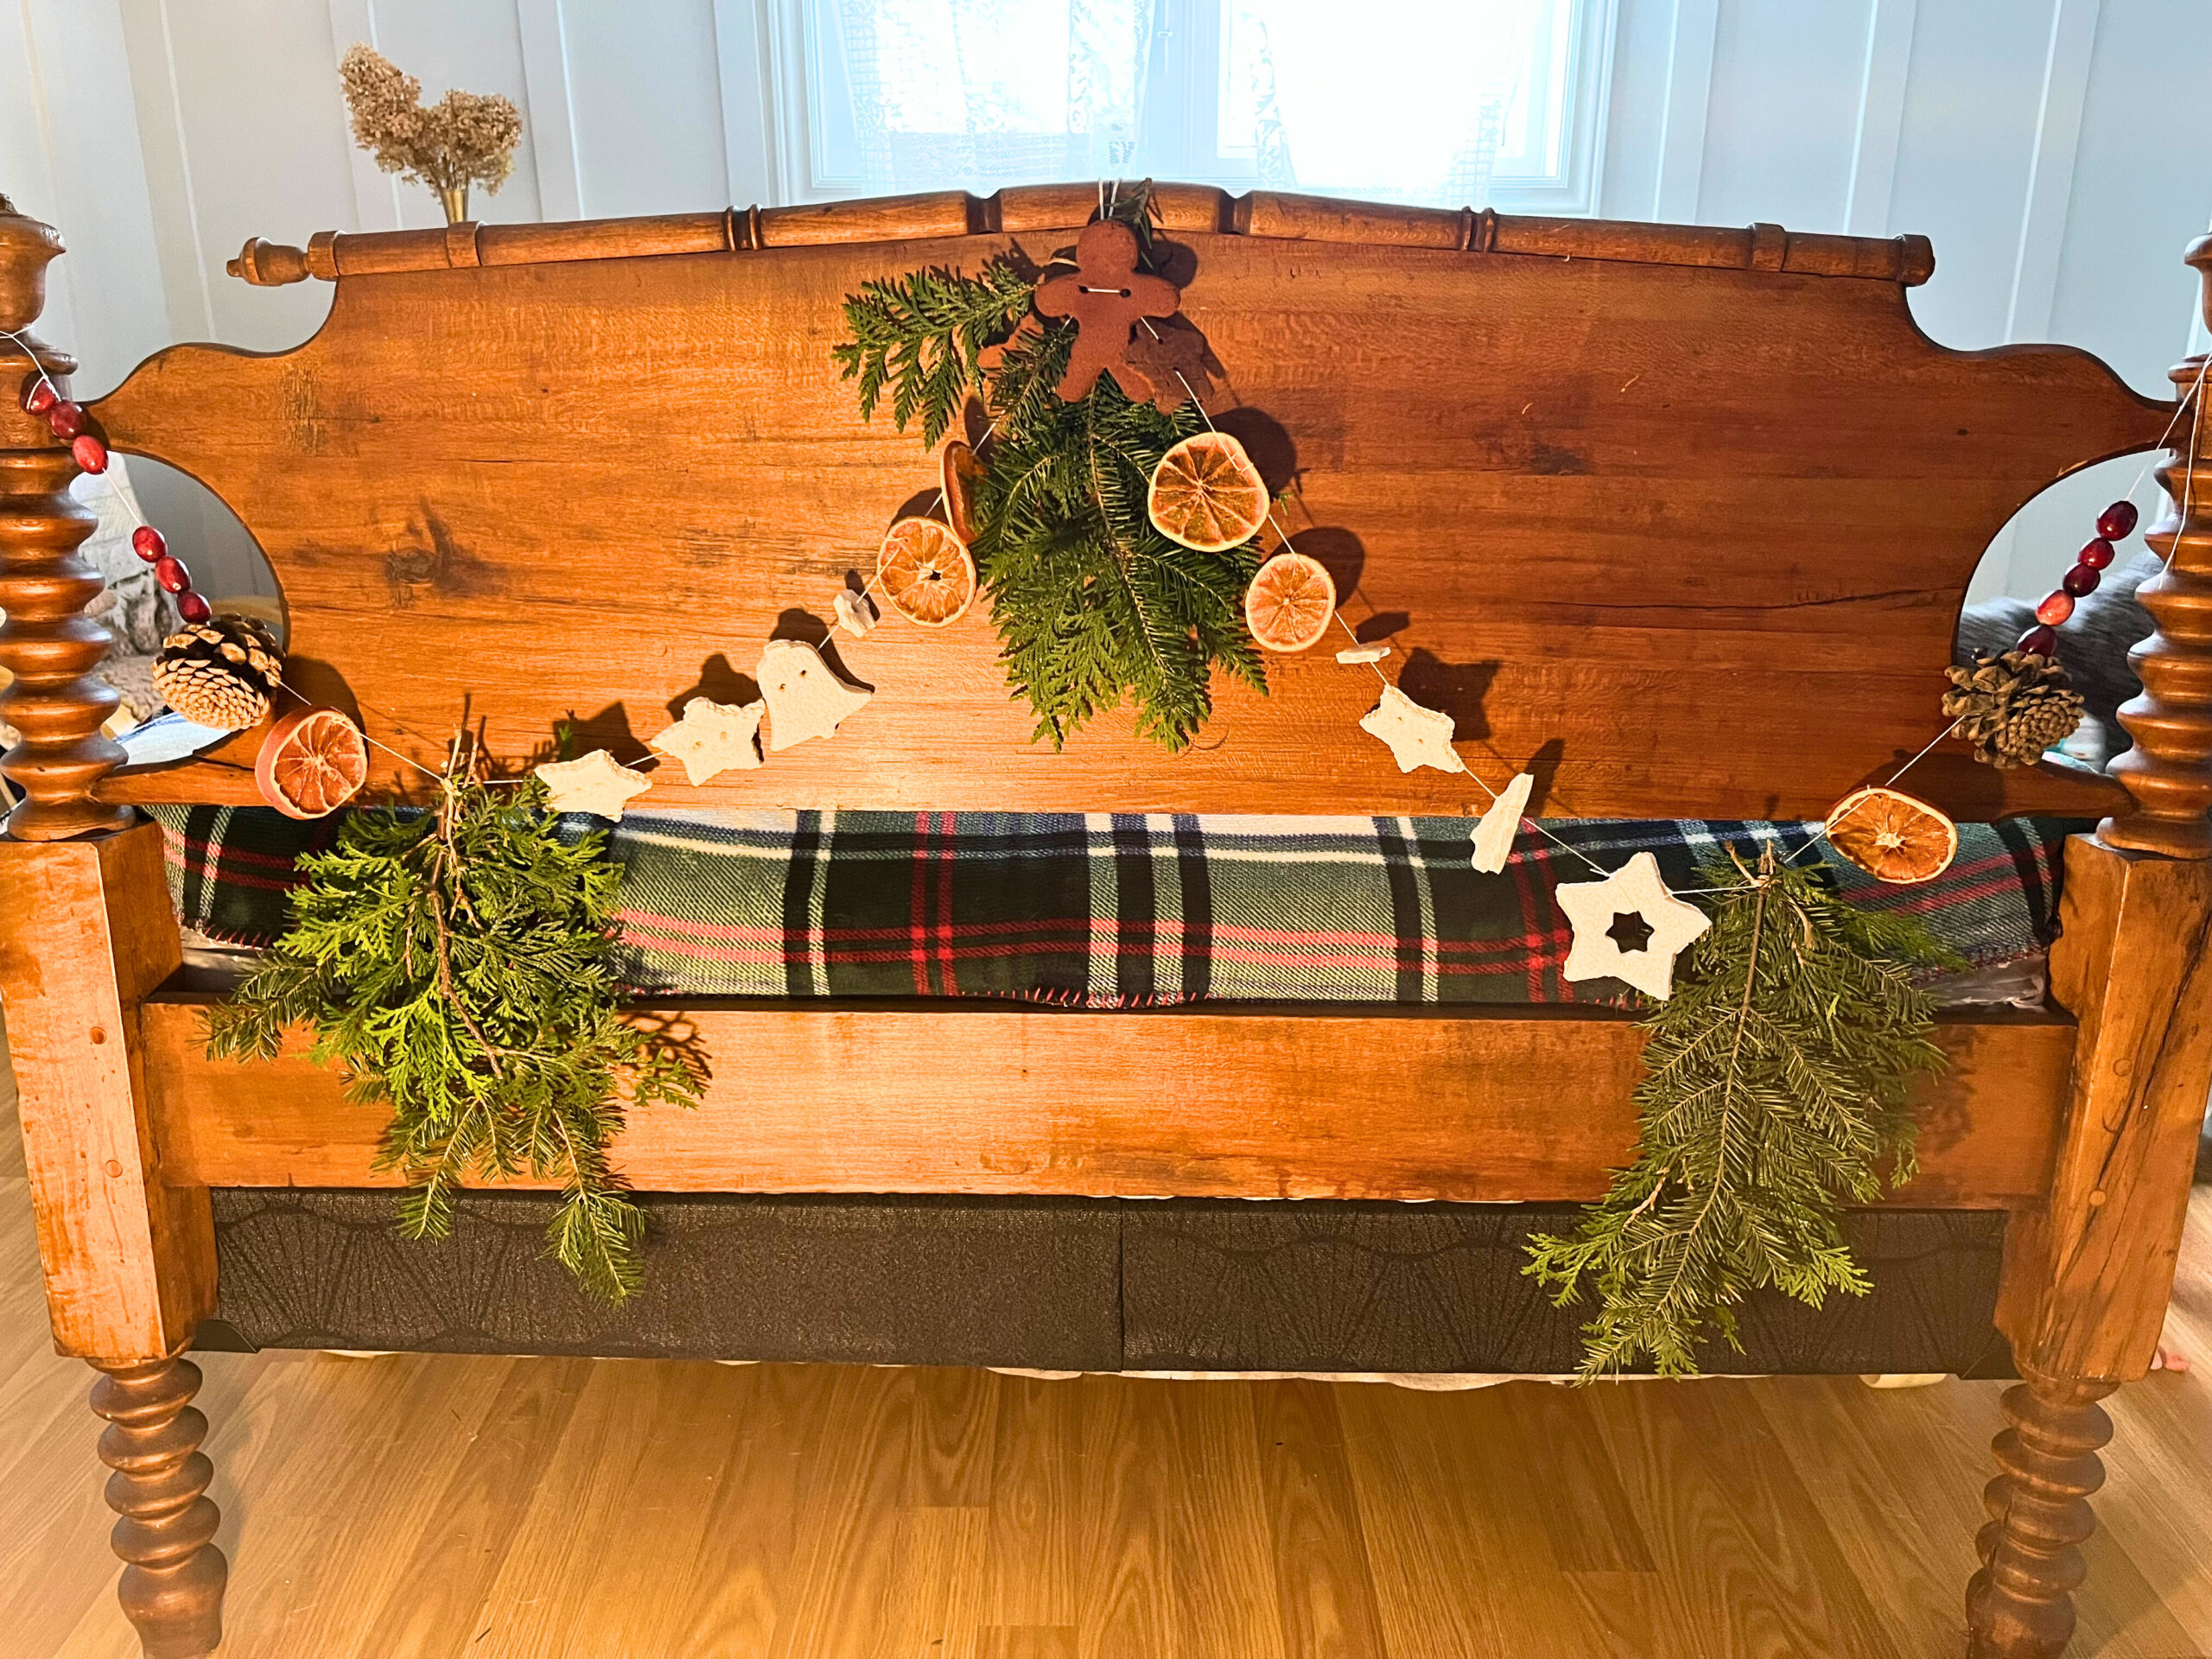 Natural Christmas garland tied to a bed footboard. It consists of orange slices, cranberries, salt dough, cinnamon dough, and pieces of evergreen.